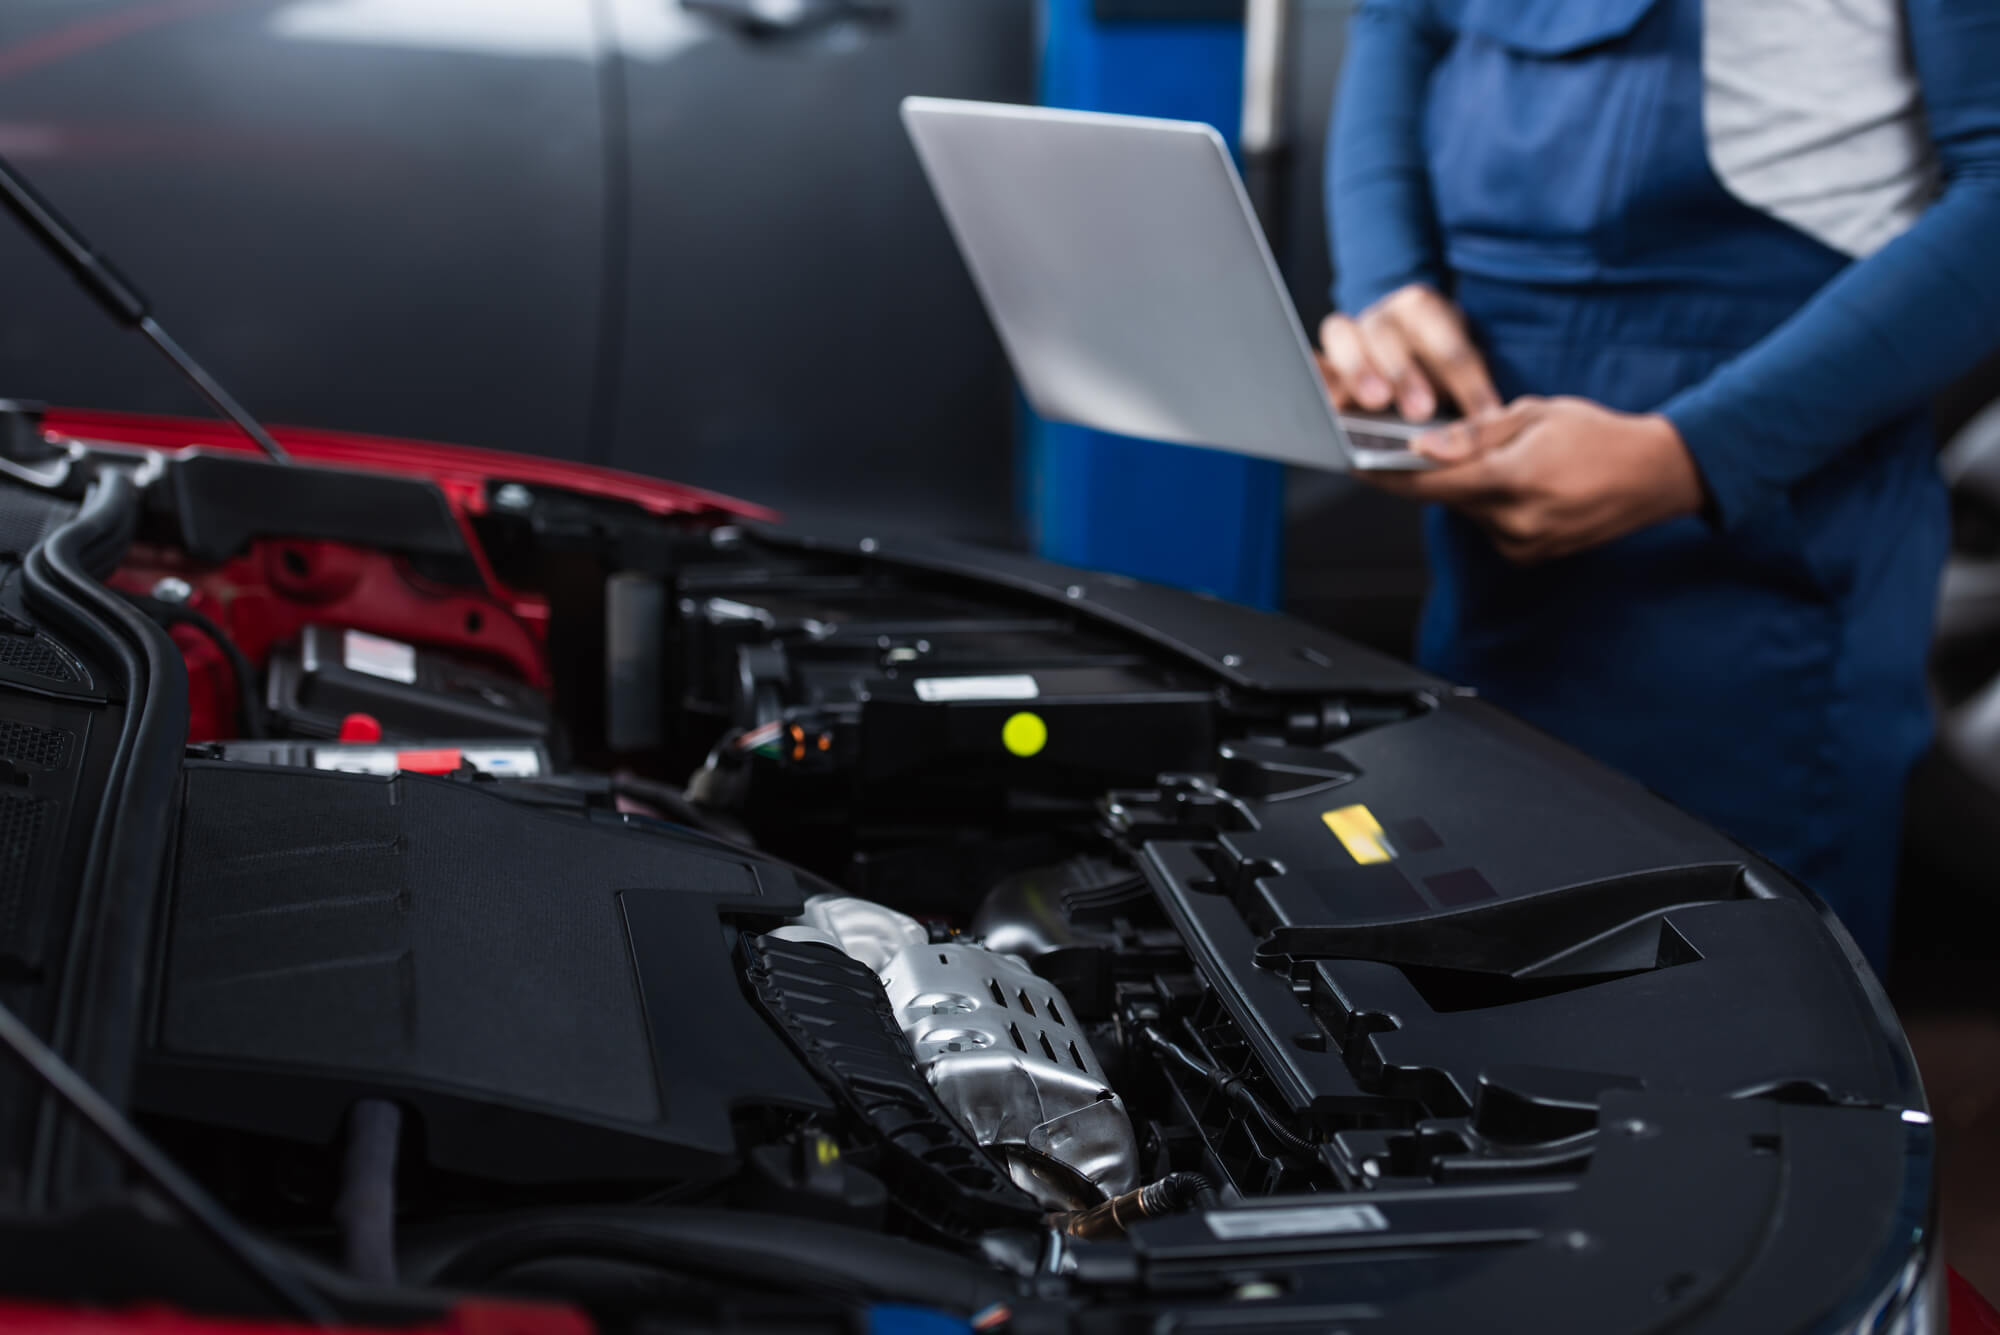 Mobile car technician by the front engine holding a laptop.